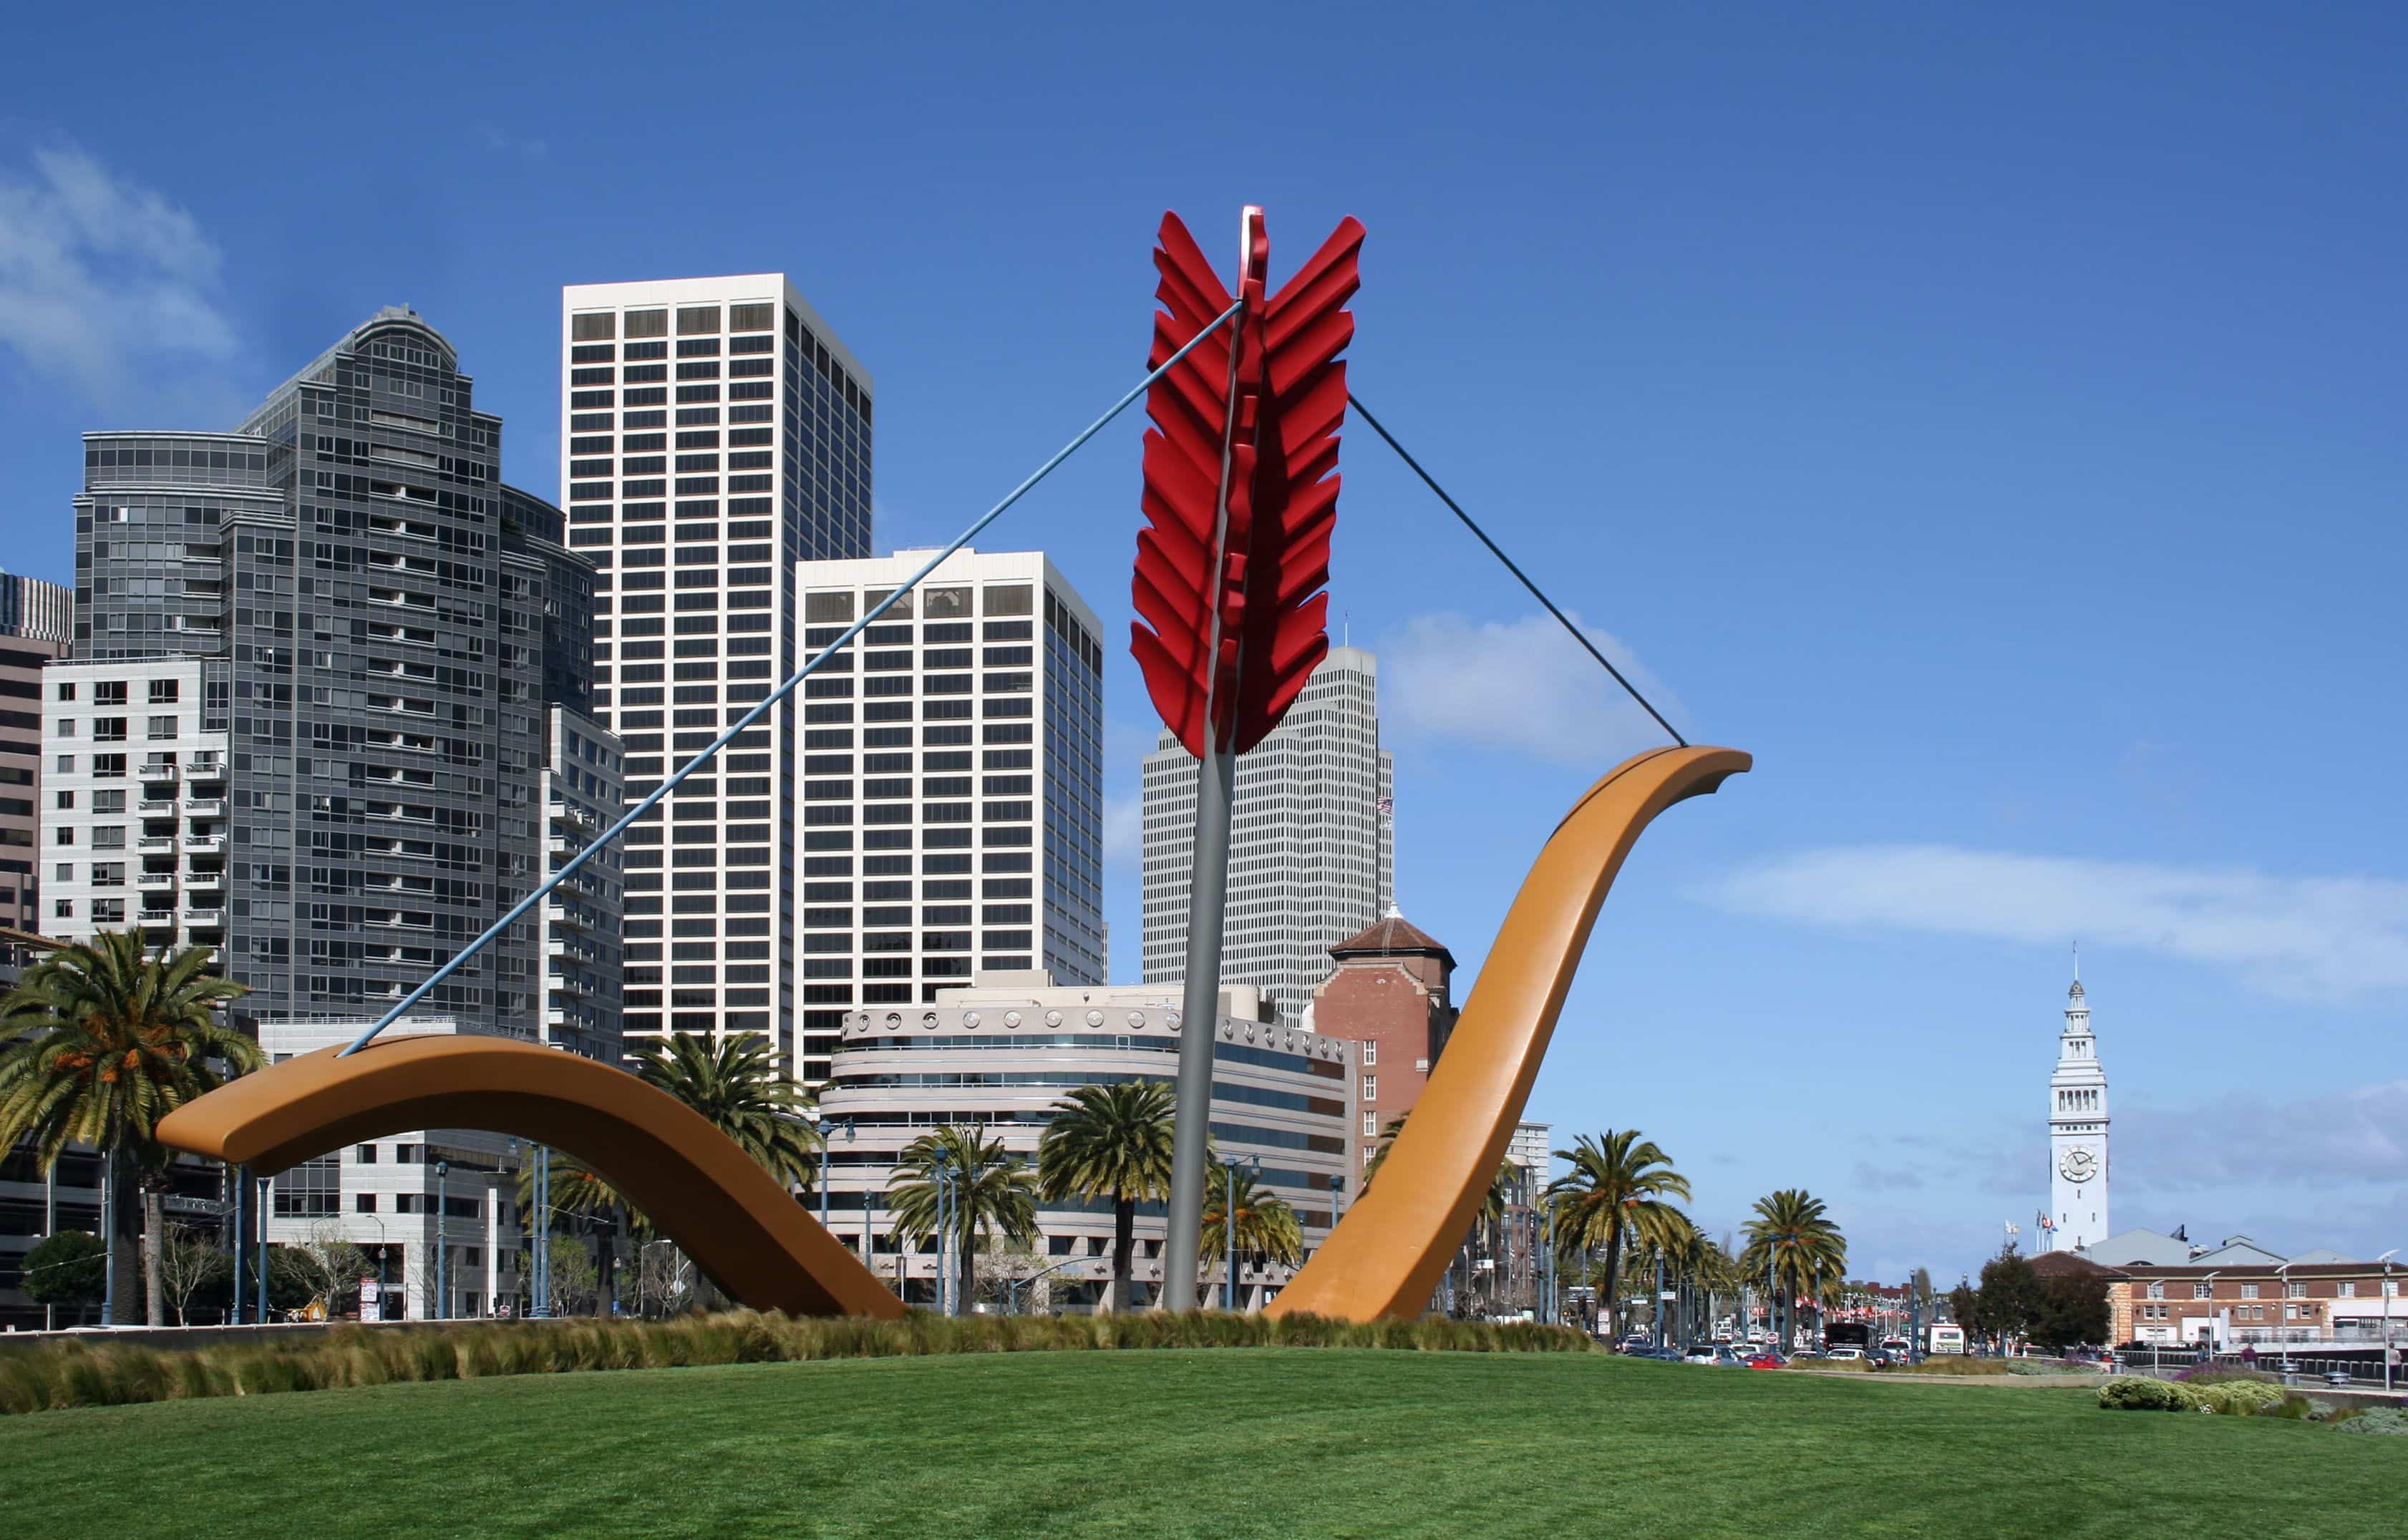 A photo of Cupid's Bow sculpture, a giant bow and arrow on the Embarcadero in San Francisco. The ferry building and downtown can be seen in the background.